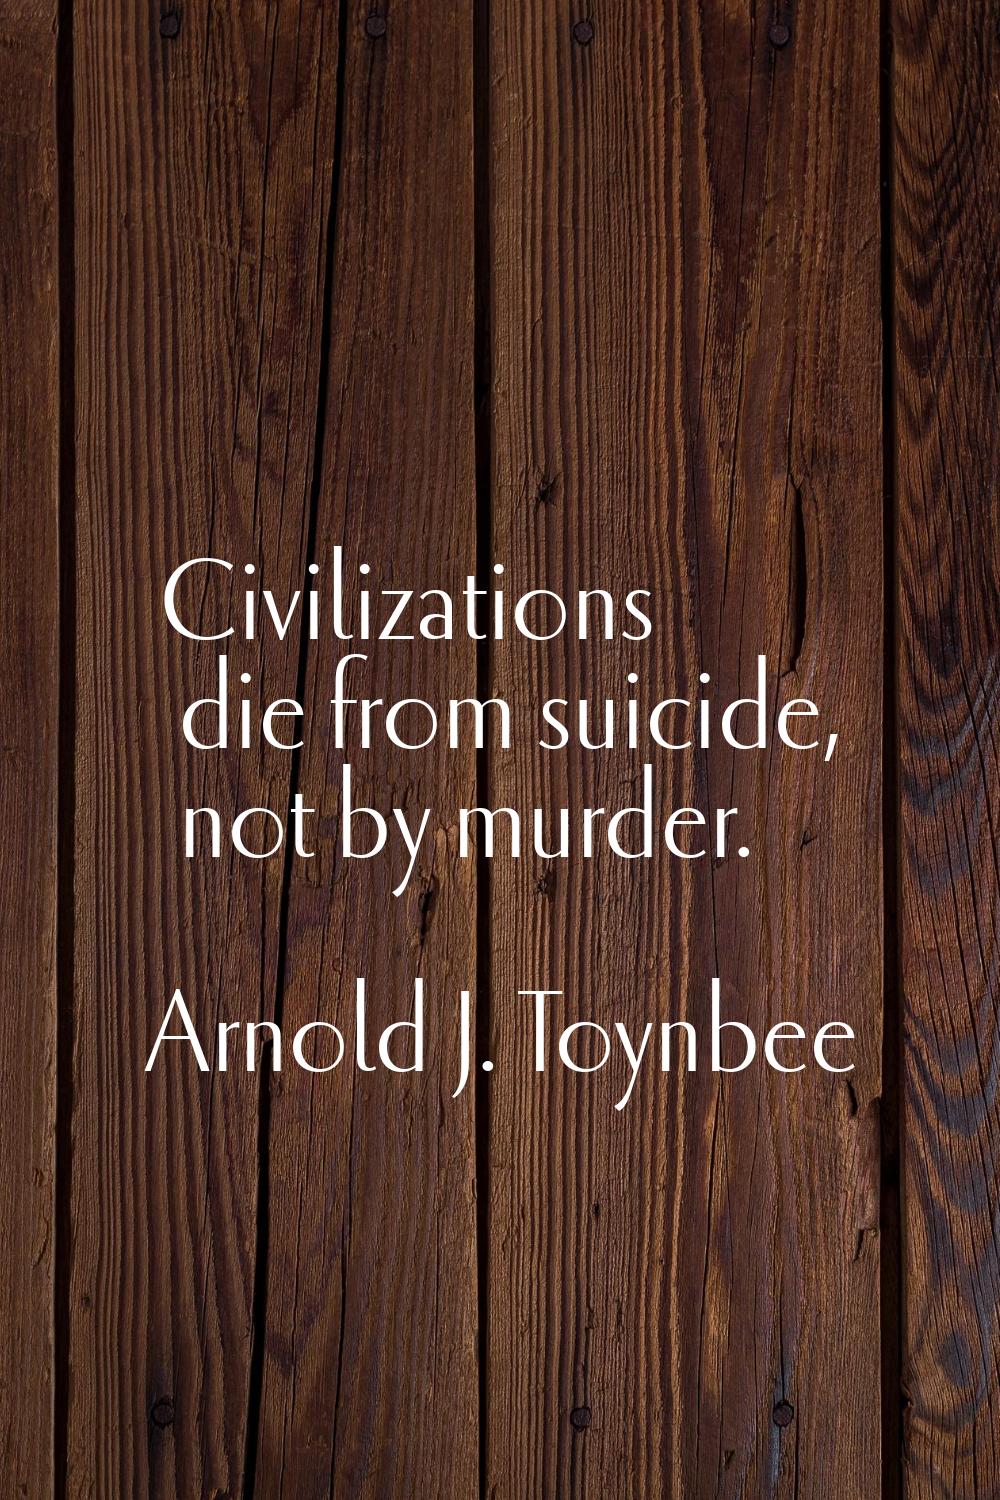 Civilizations die from suicide, not by murder.